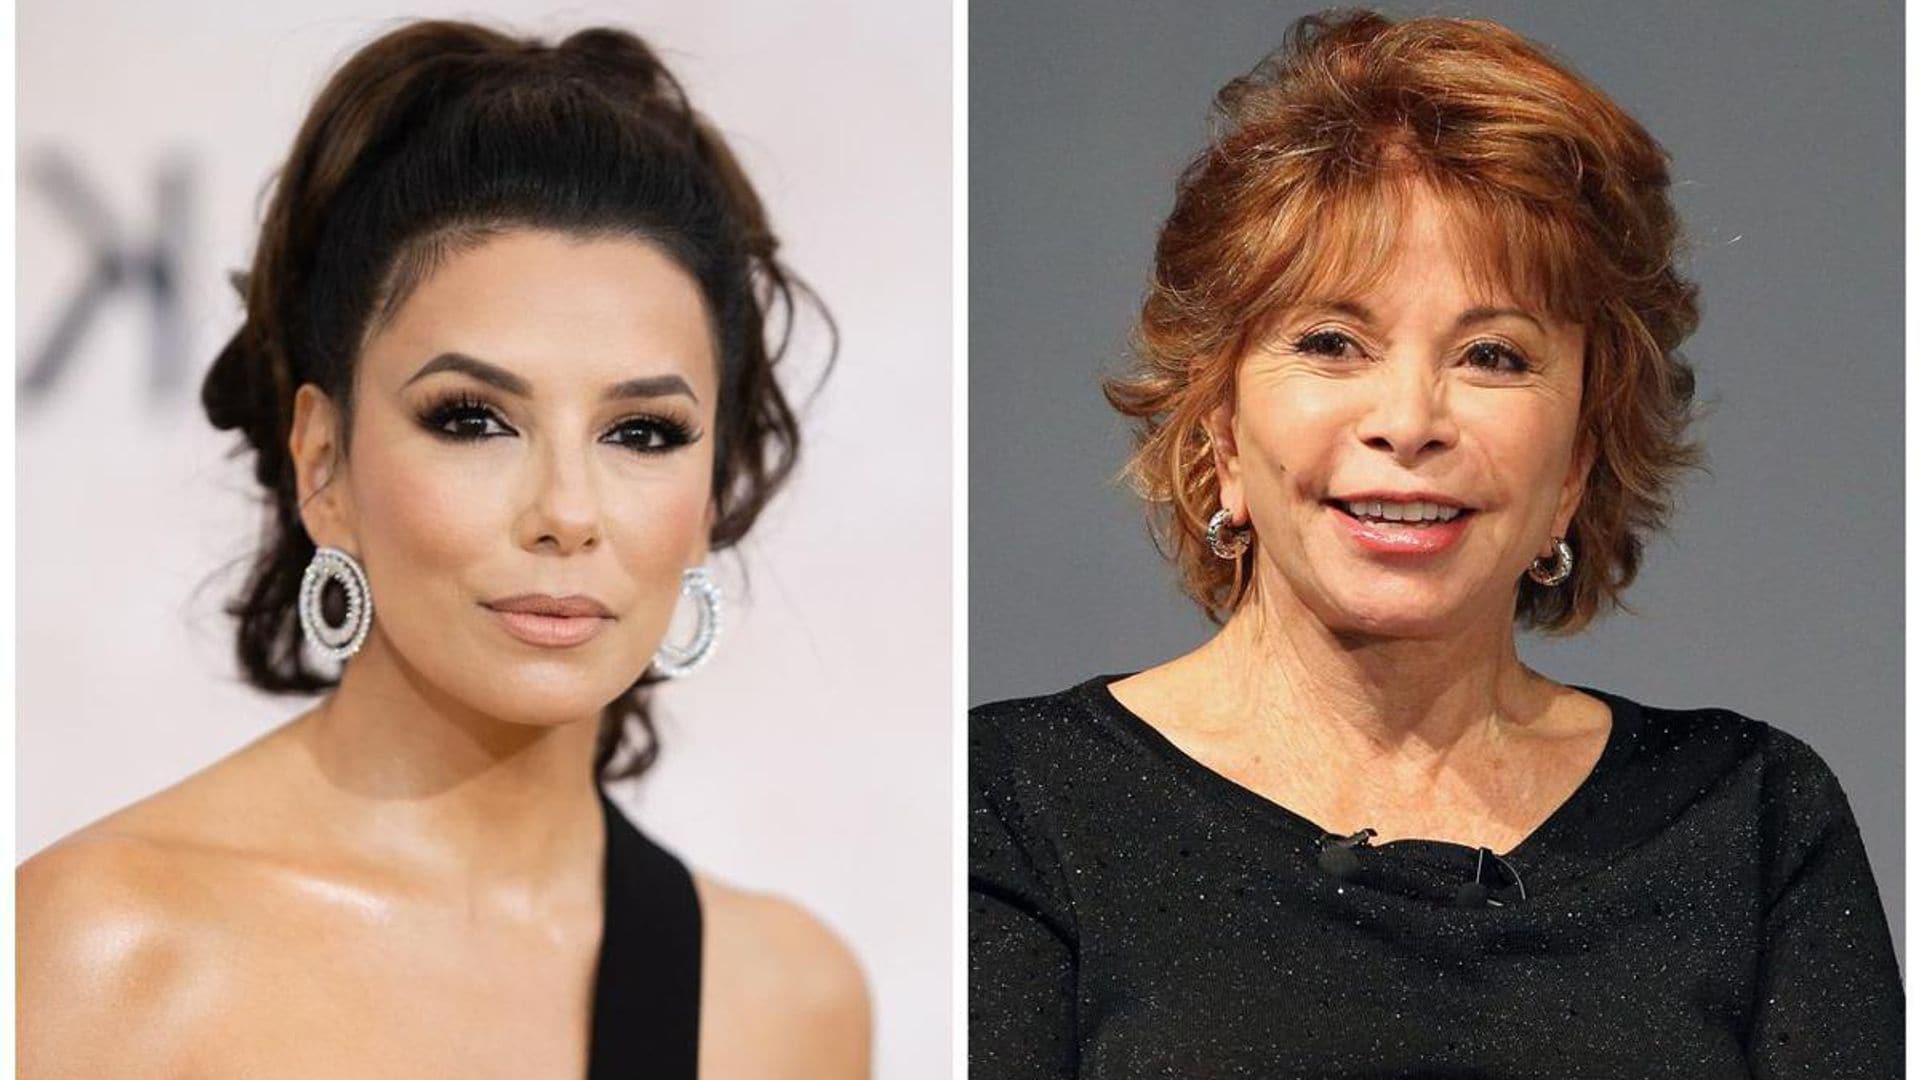 Eva Longoria and Isabel Allende share their thoughts on society's view on male aging